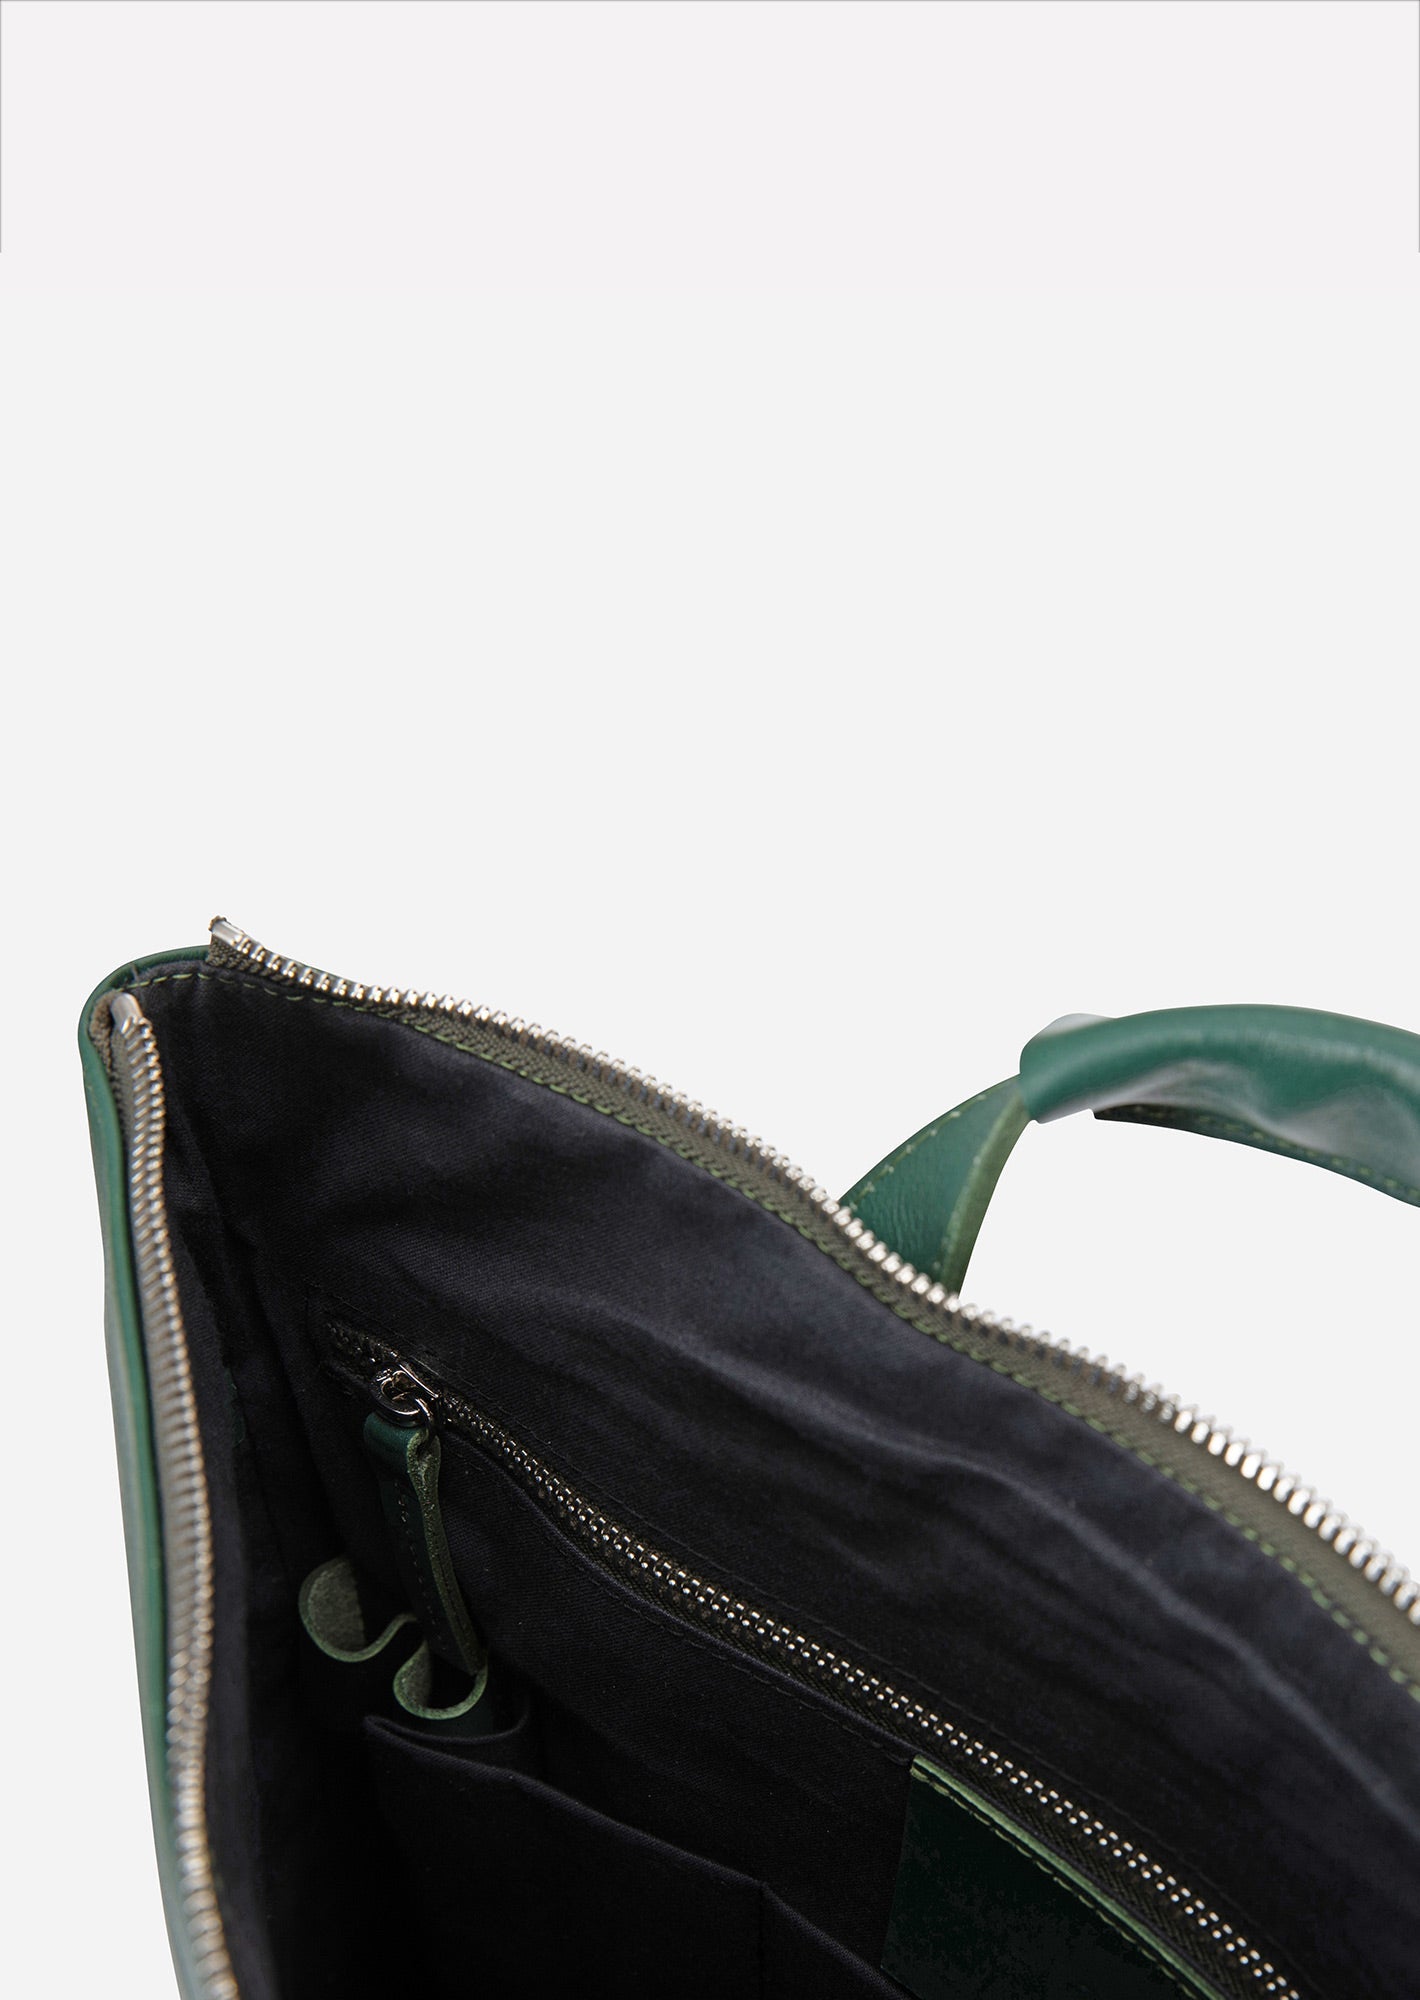 TOTE_BACKPACK_ELLIOT_GREEN_Designed_in_Berlin_Made_to_last_Handmade_in_Poland.